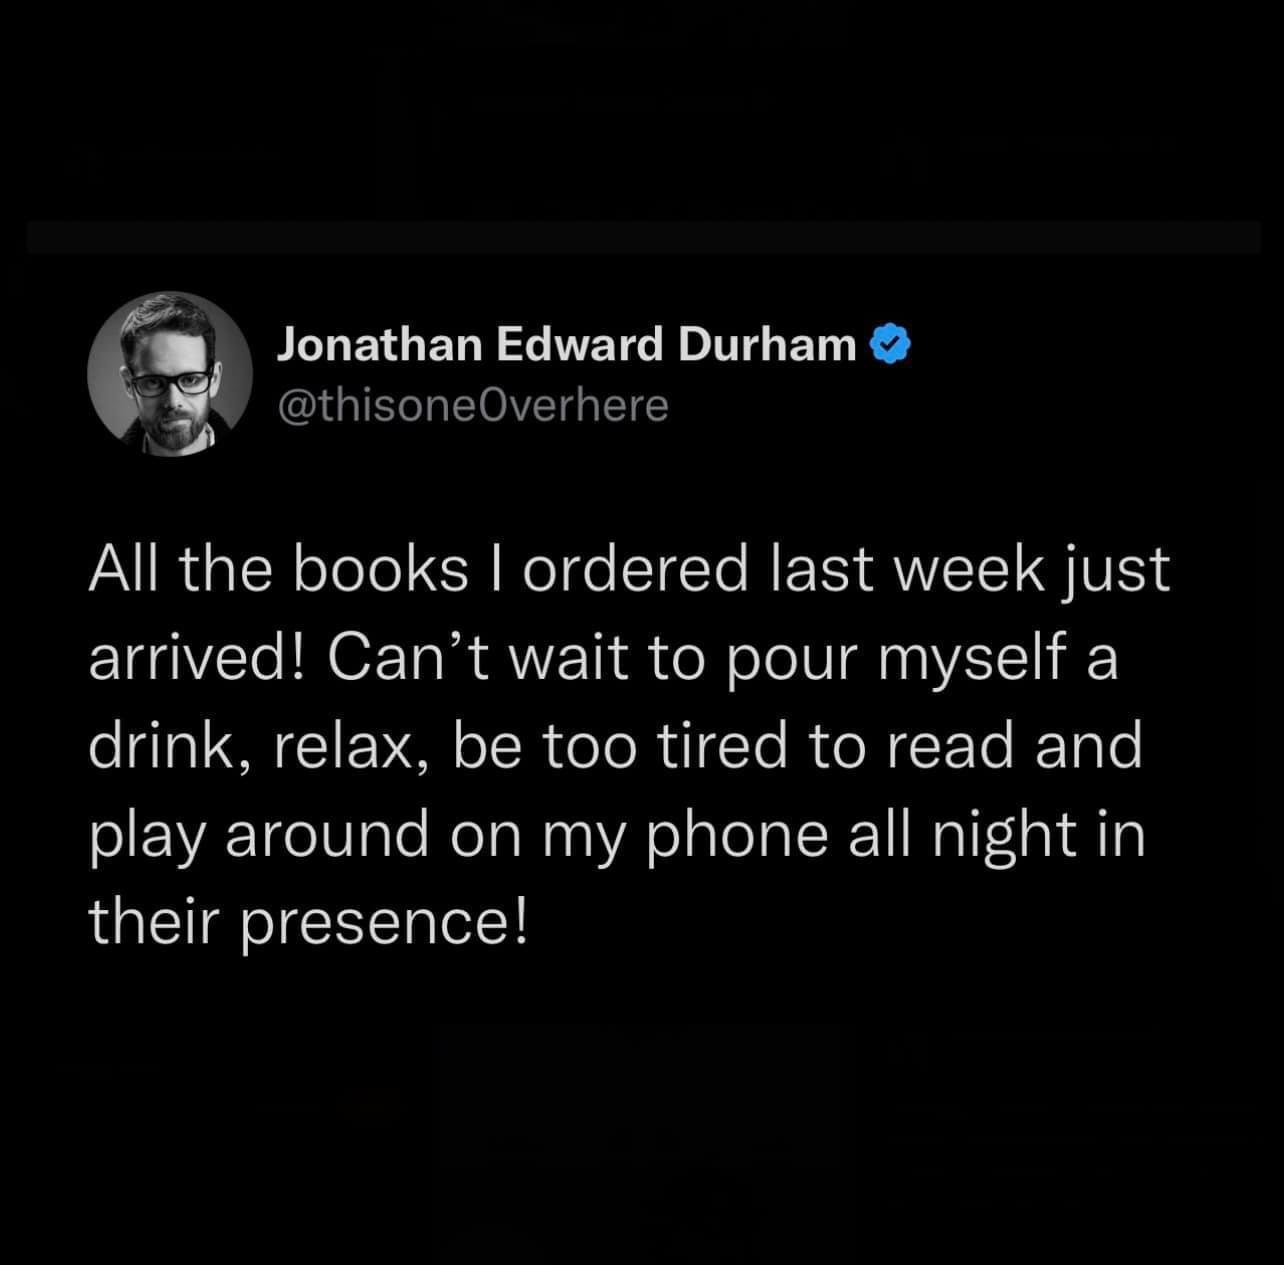 funny tweets and memes - female instagram tweets - Jonathan Edward Durham All the books I ordered last week just arrived! Can't wait to pour myself a drink, relax, be too tired to read and play around on my phone all night in their presence!